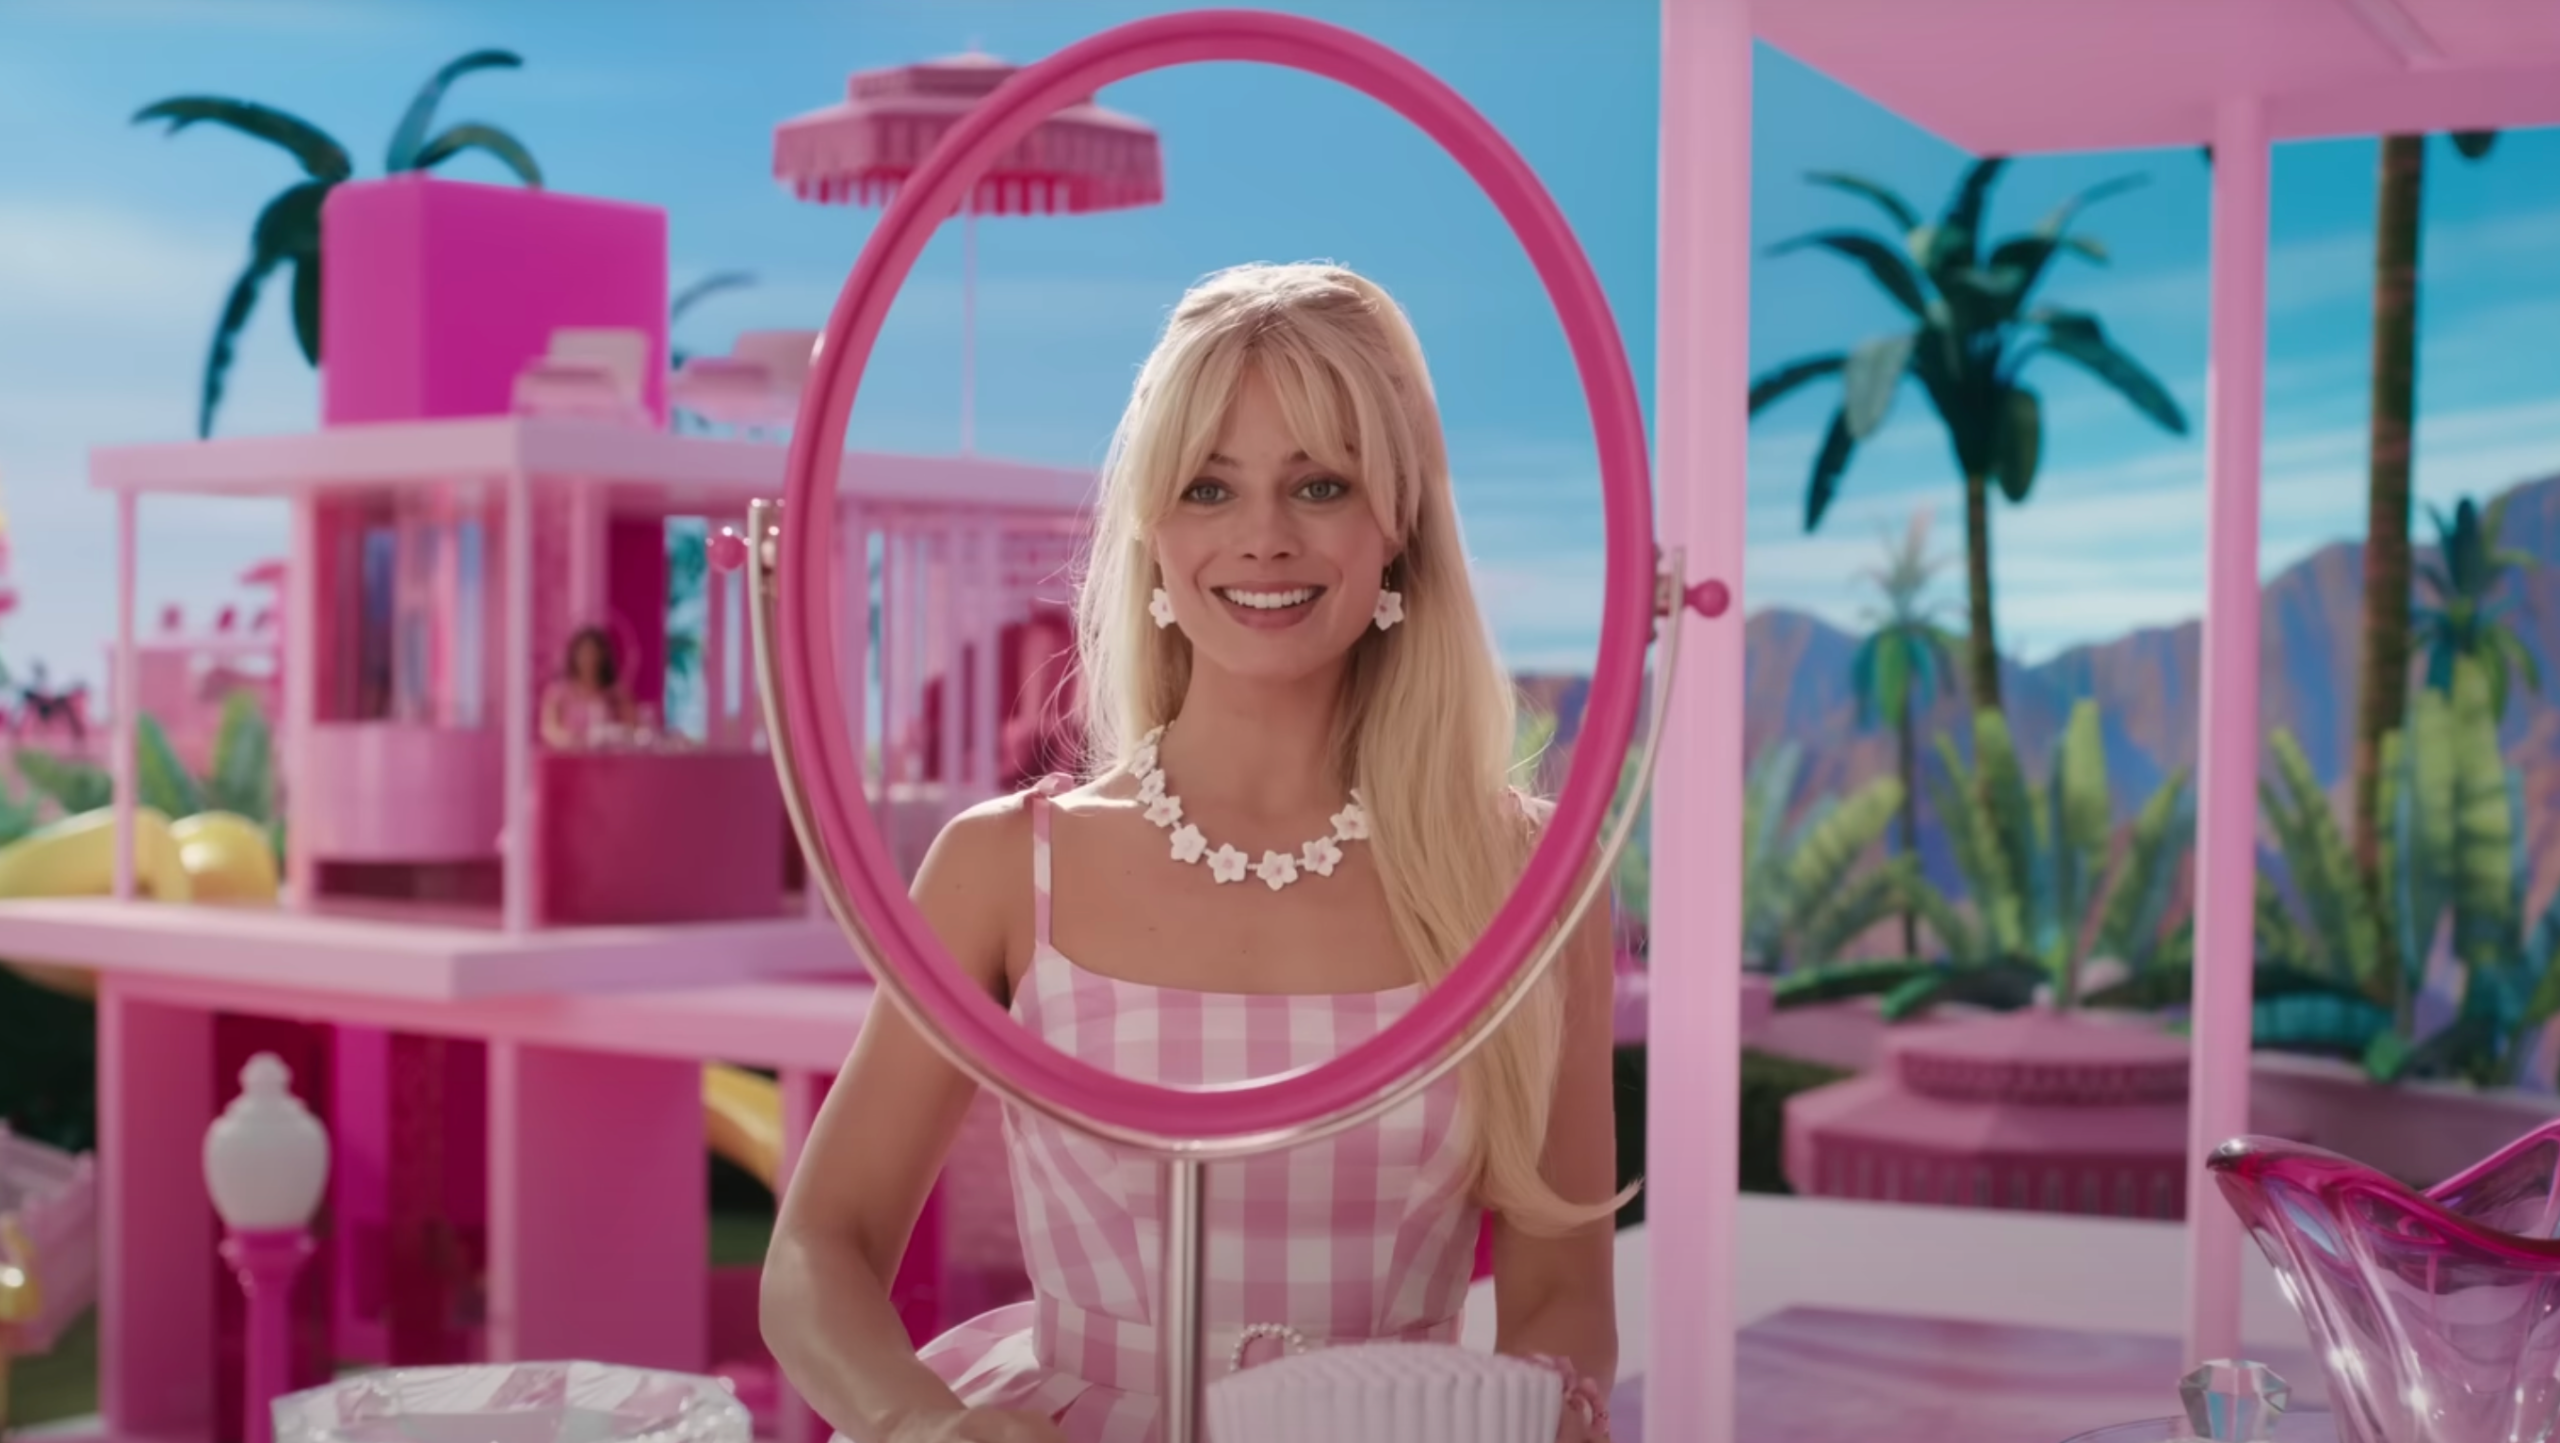 The "Barbie" trailer is jam-packed with joy. 2